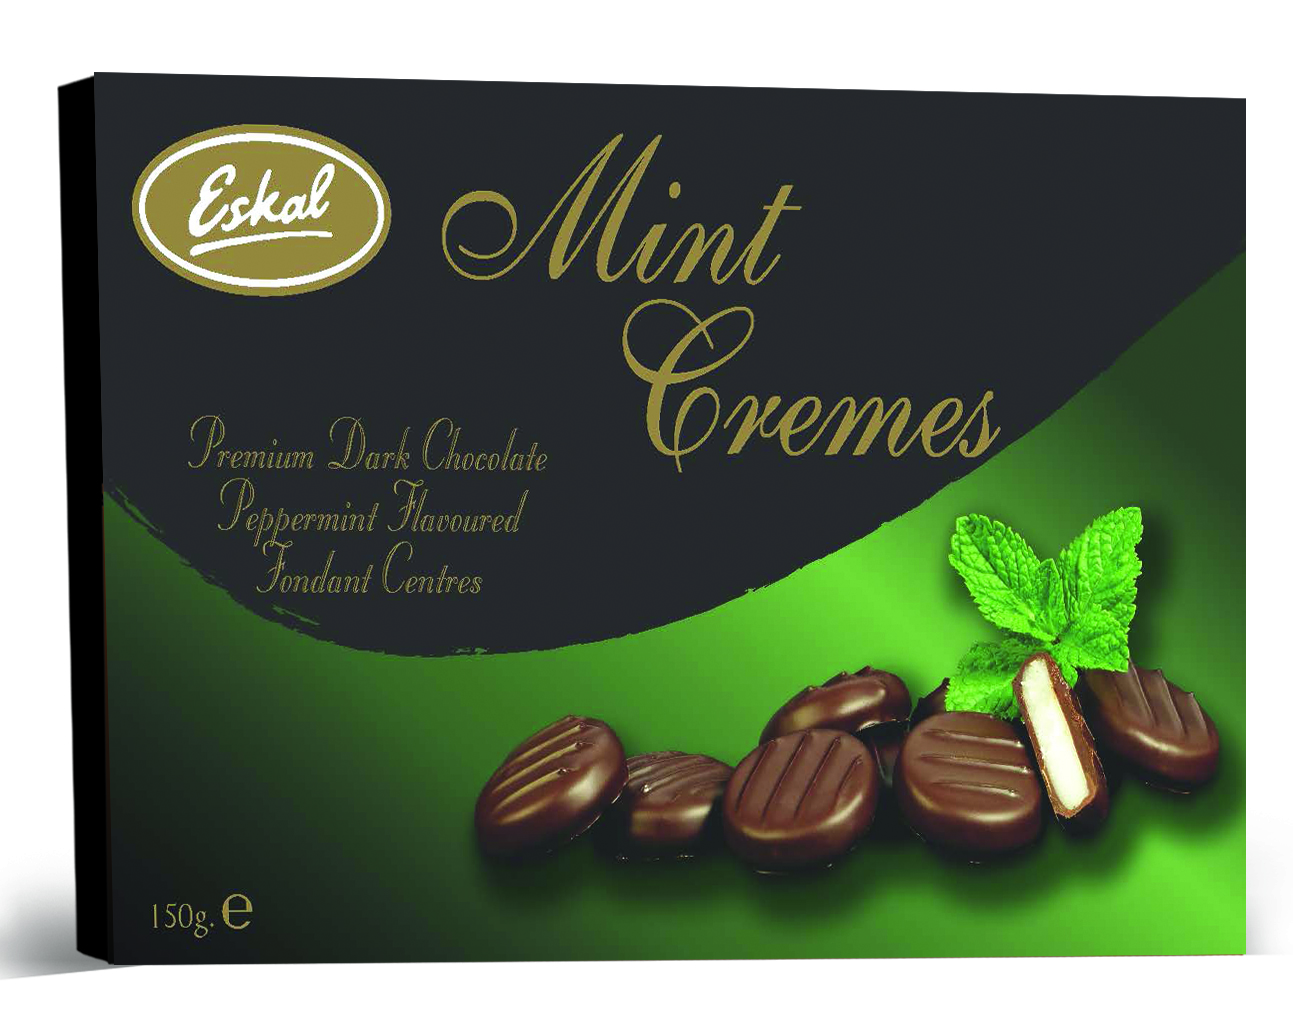 ESKAL MINT CREMES GIFT CHOCOLATE